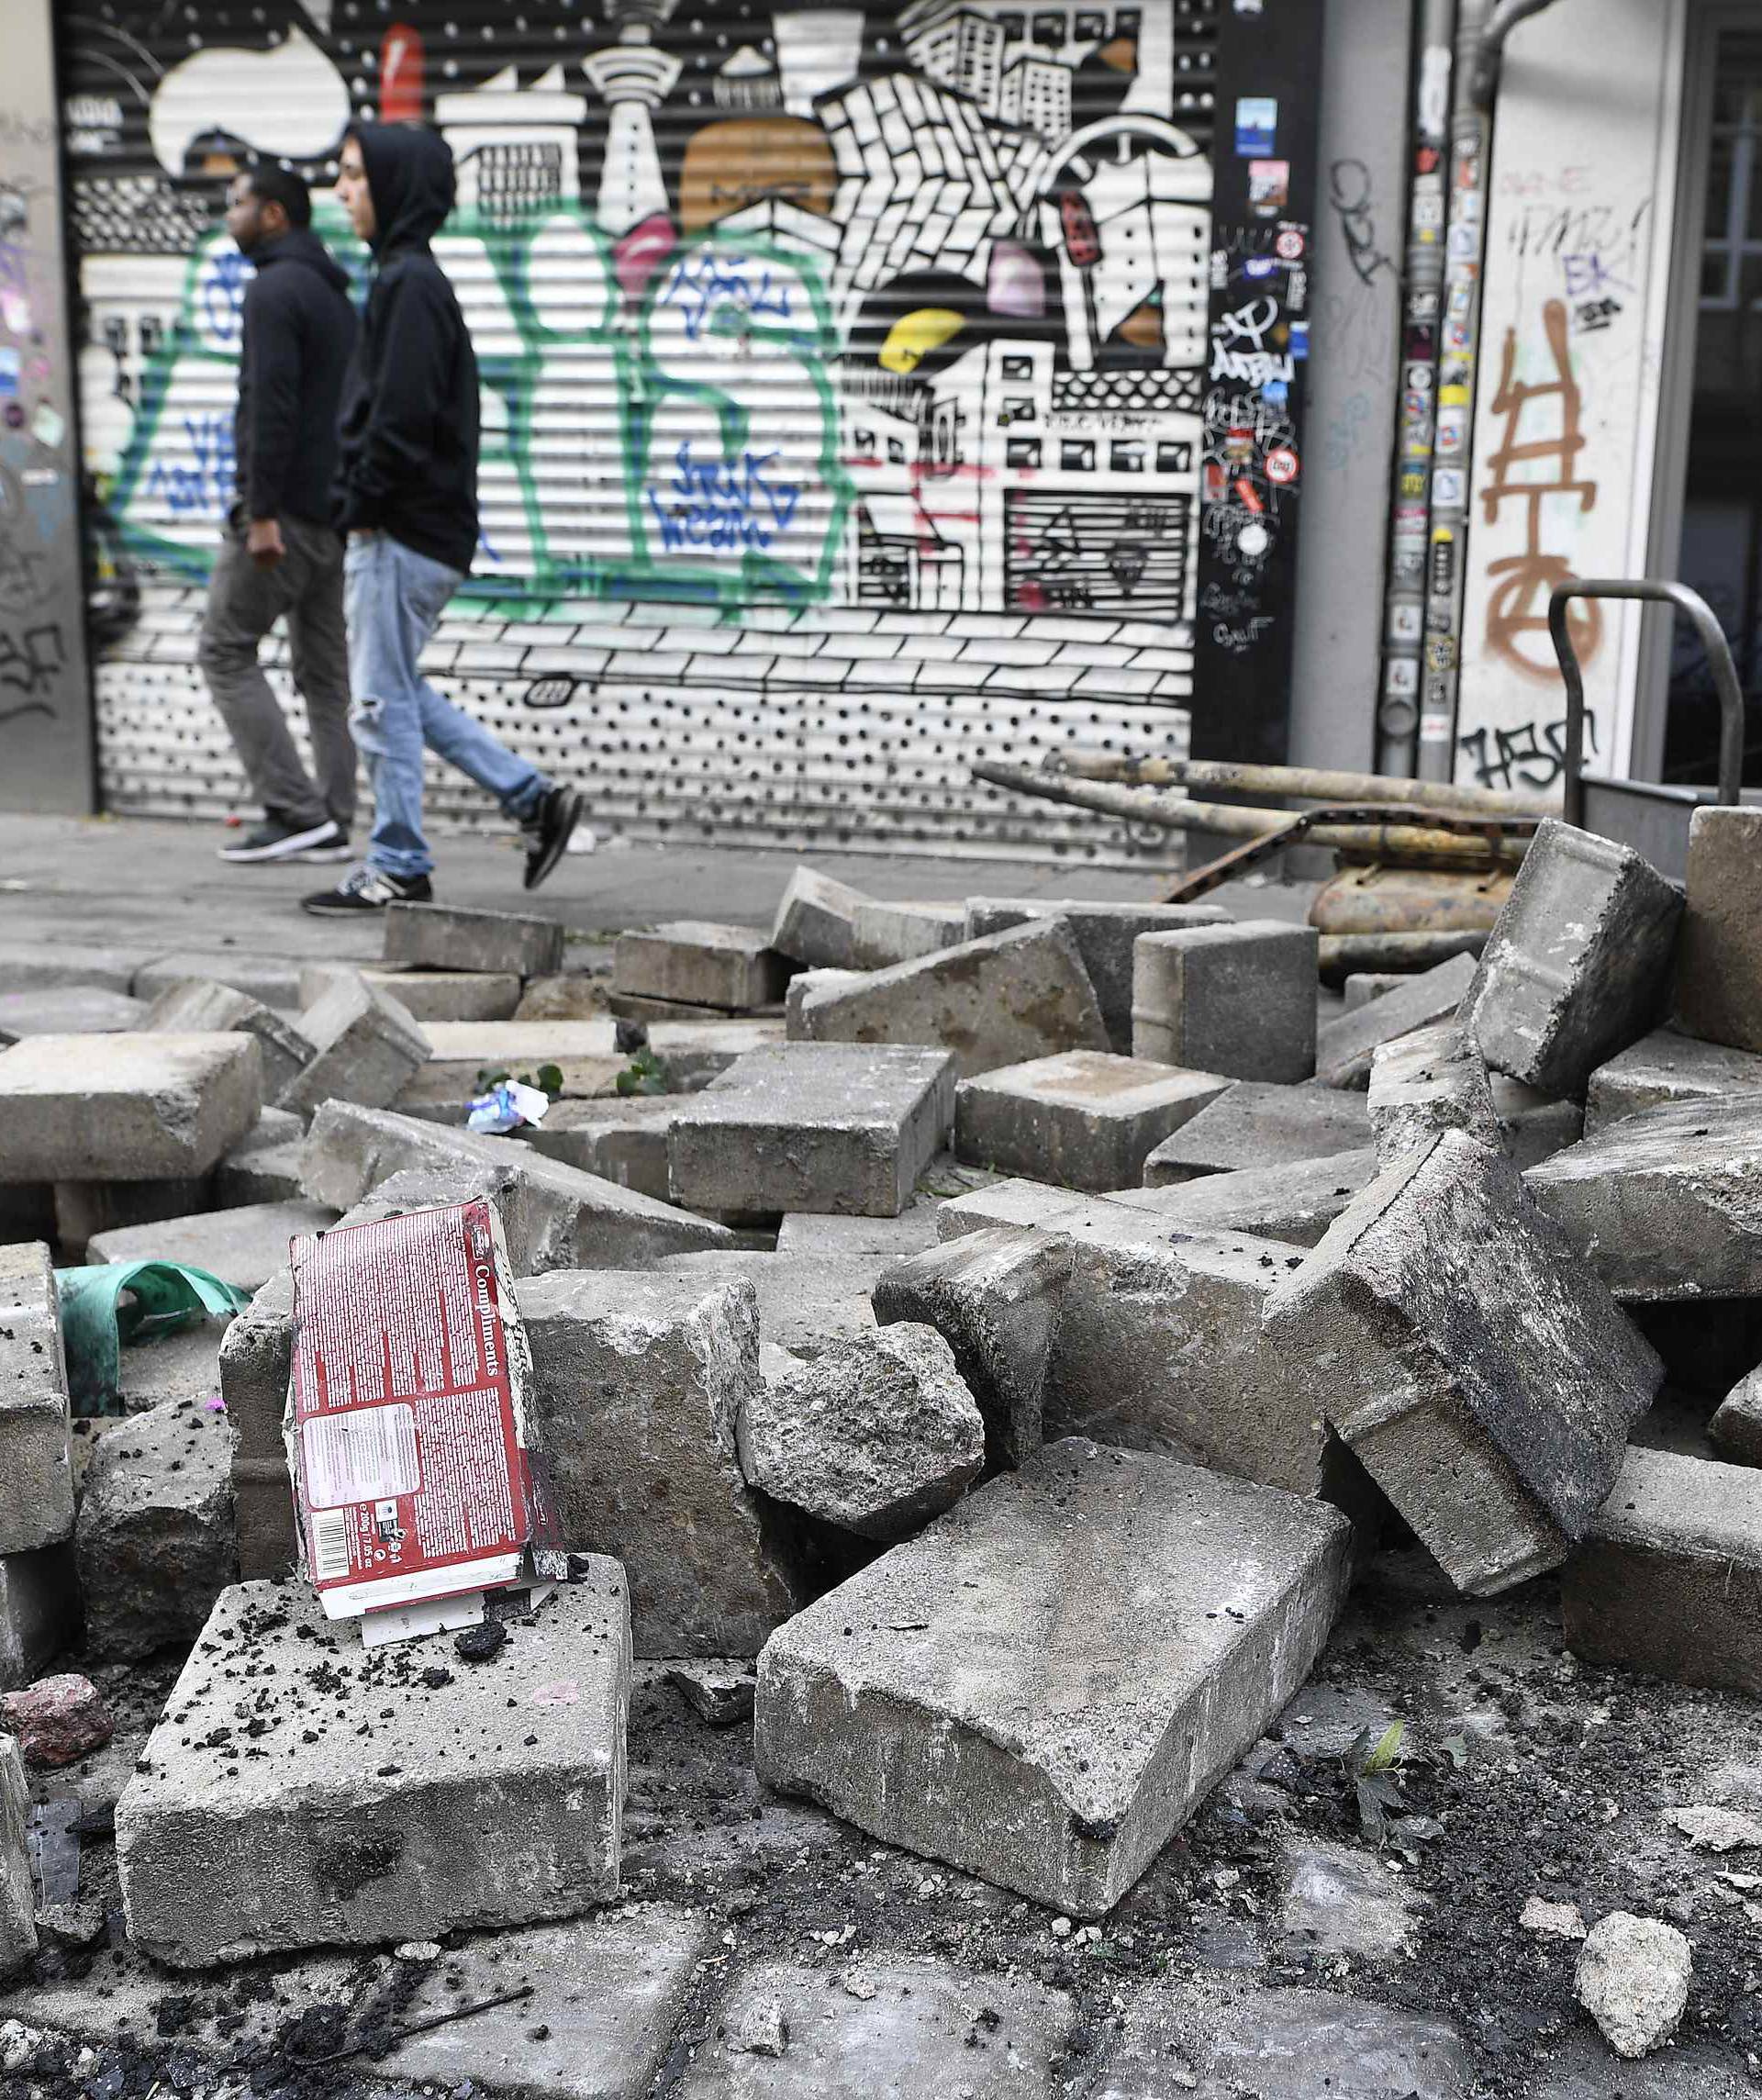 People walk on a street with damaged pavement after demonstrations at the G20 summit in Hamburg